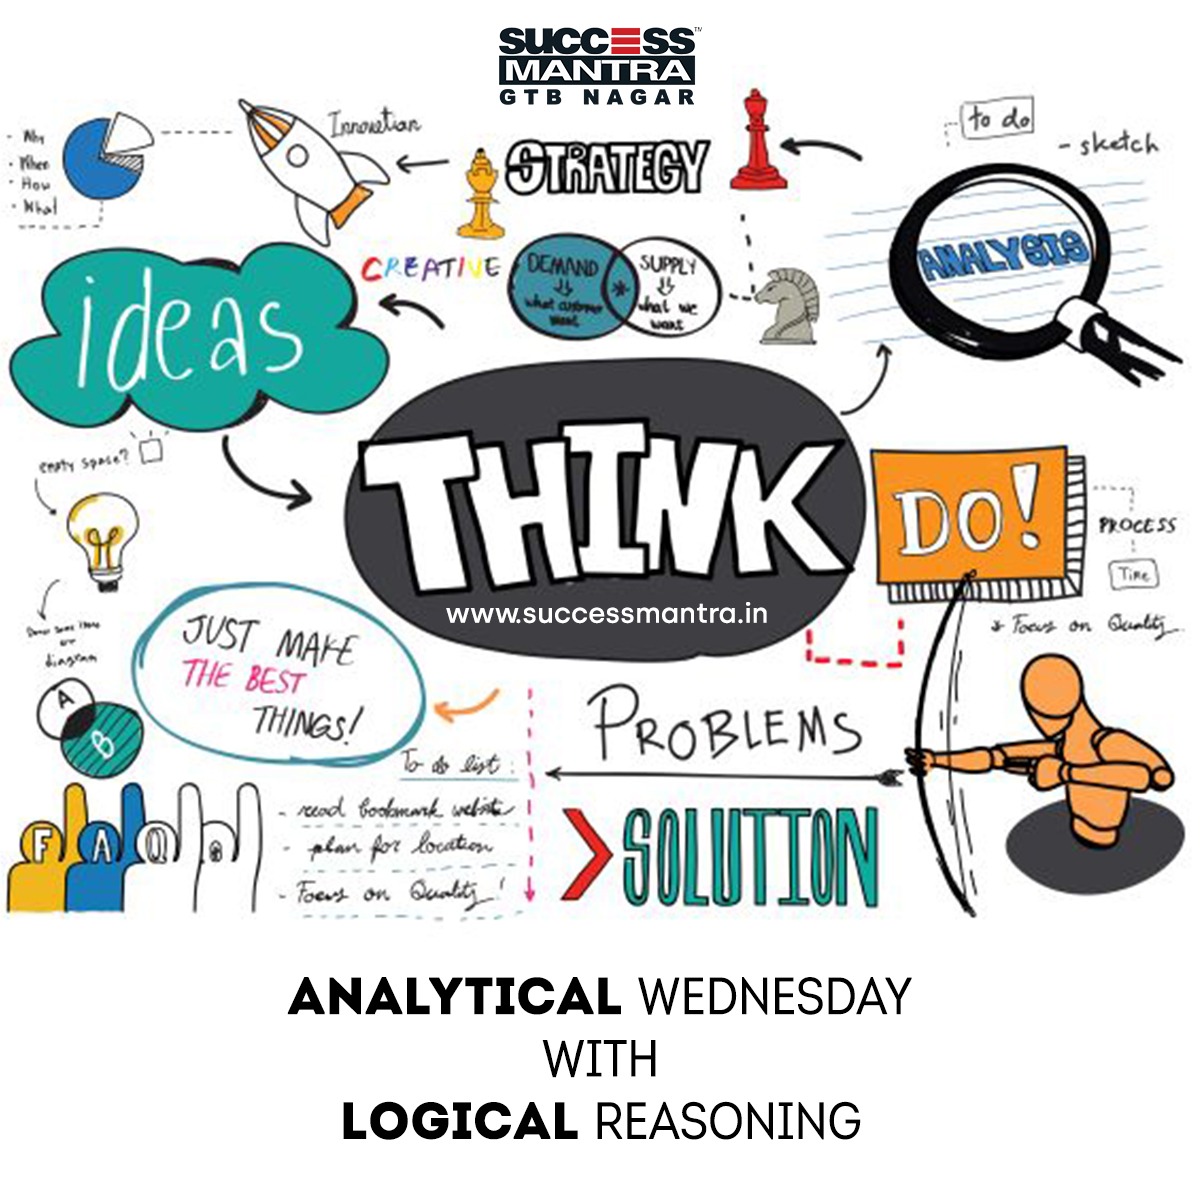 Questions on Logical Reasoning SMLRQ036